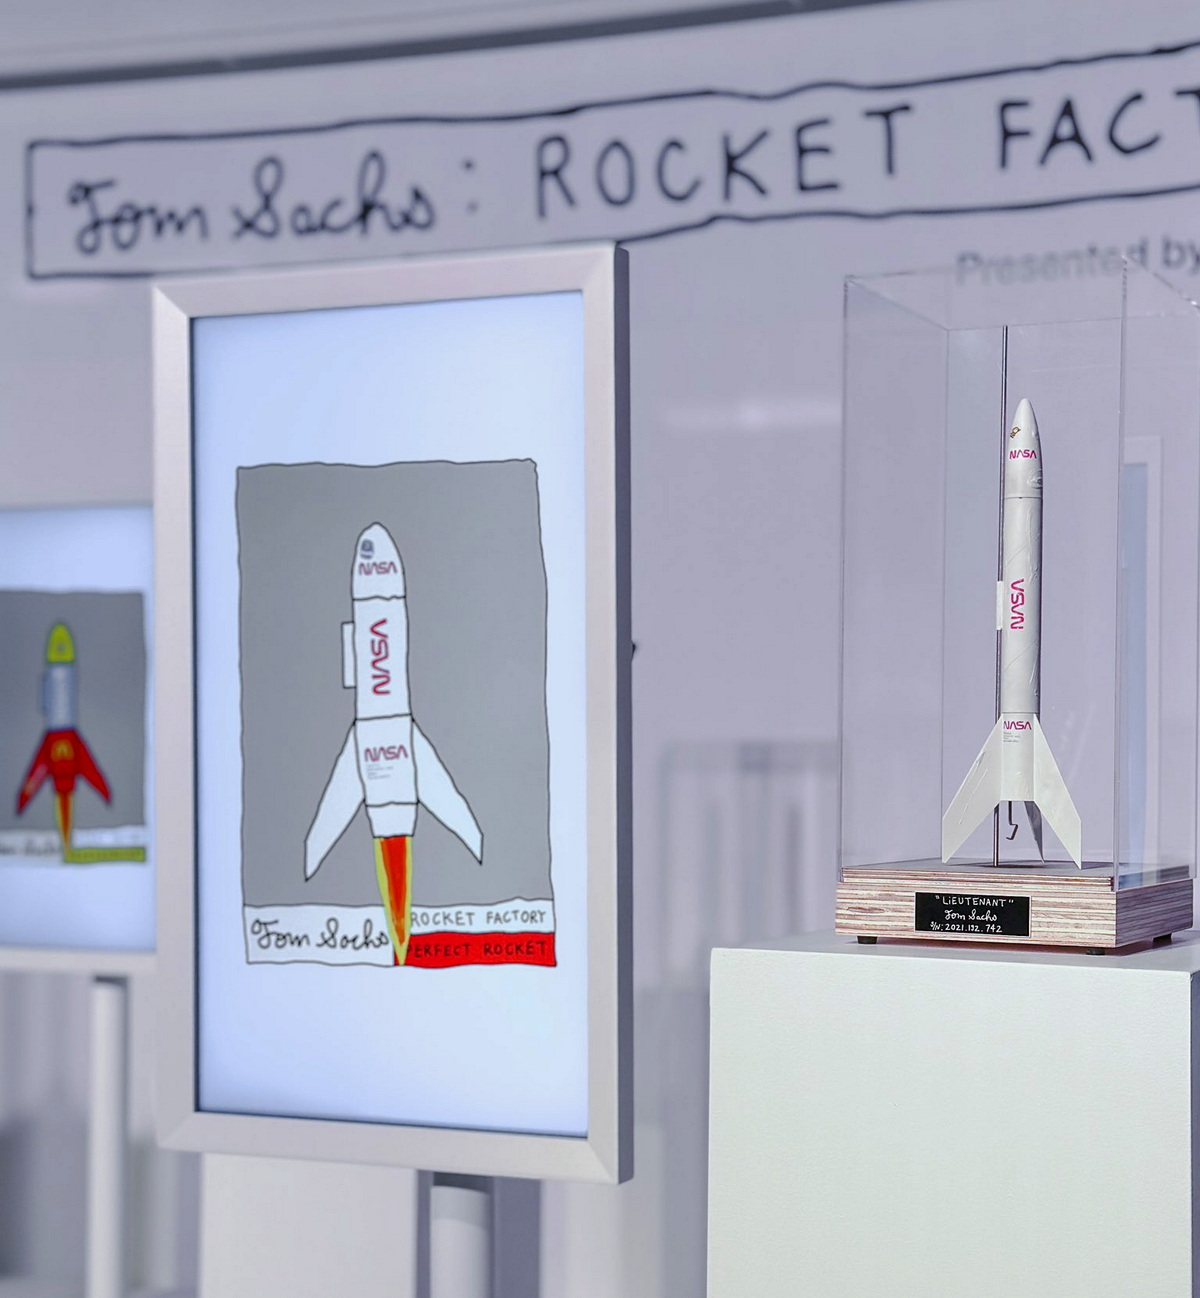 Rocket Factory NFT/Physical Collection by Tom Sachs